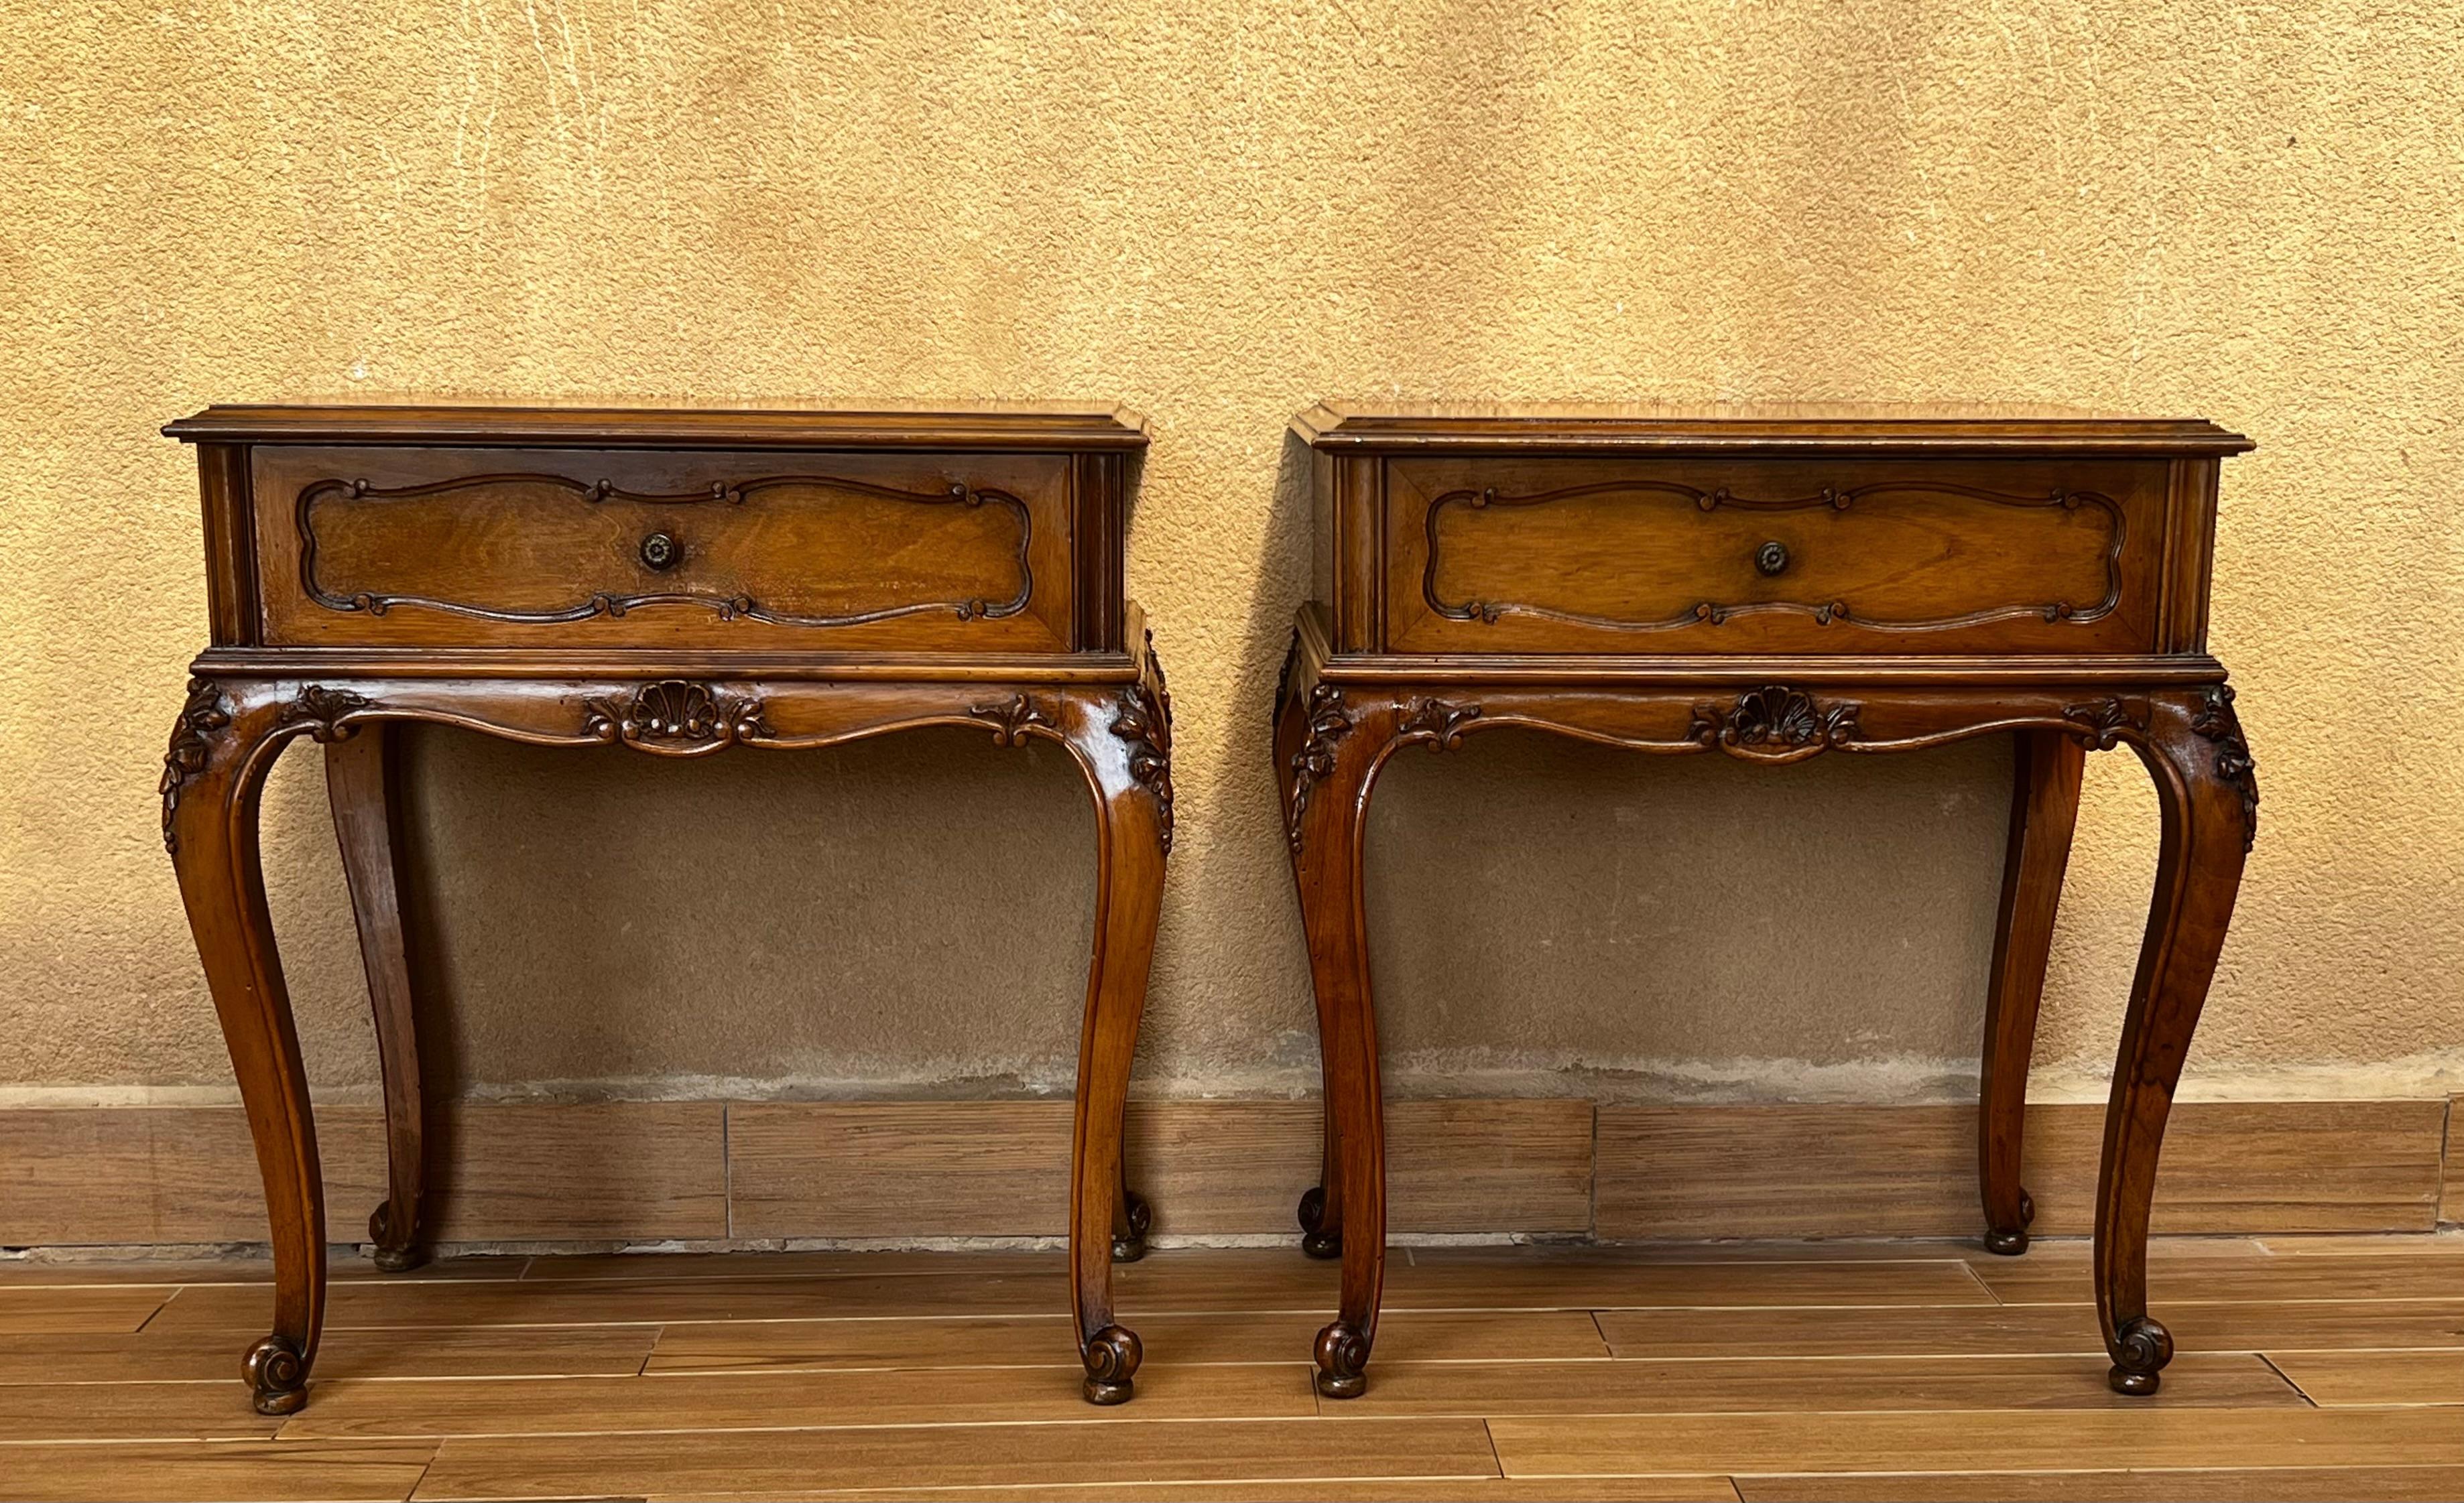 20th century pair of French nightstands with one-drawer and cabriole legs. The tables have a beautiful carved in legs and apron front.
Really nice patina.